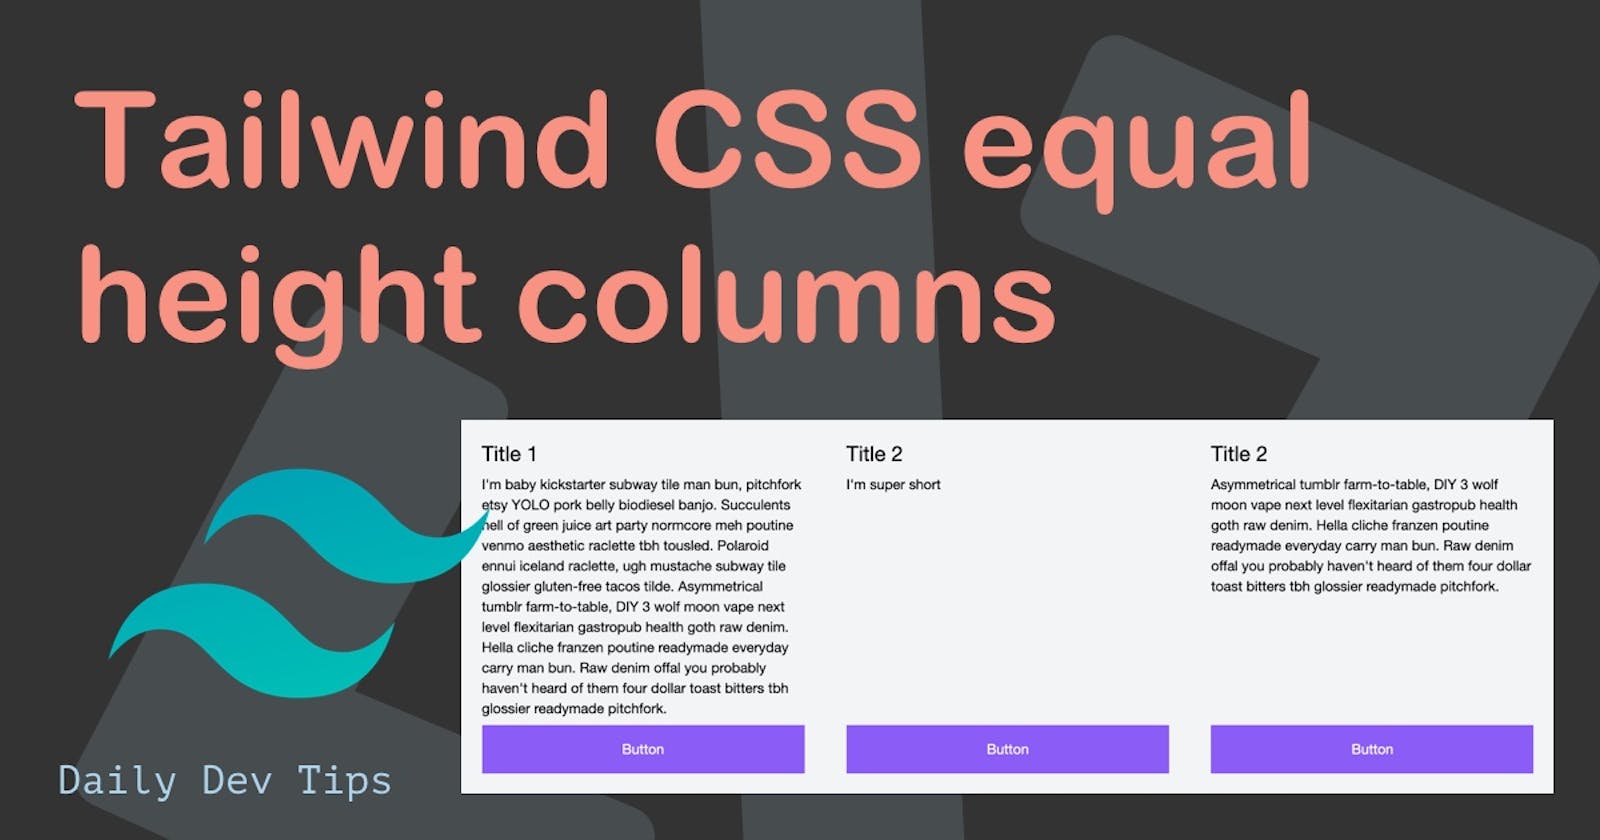 Tailwind CSS equal height columns